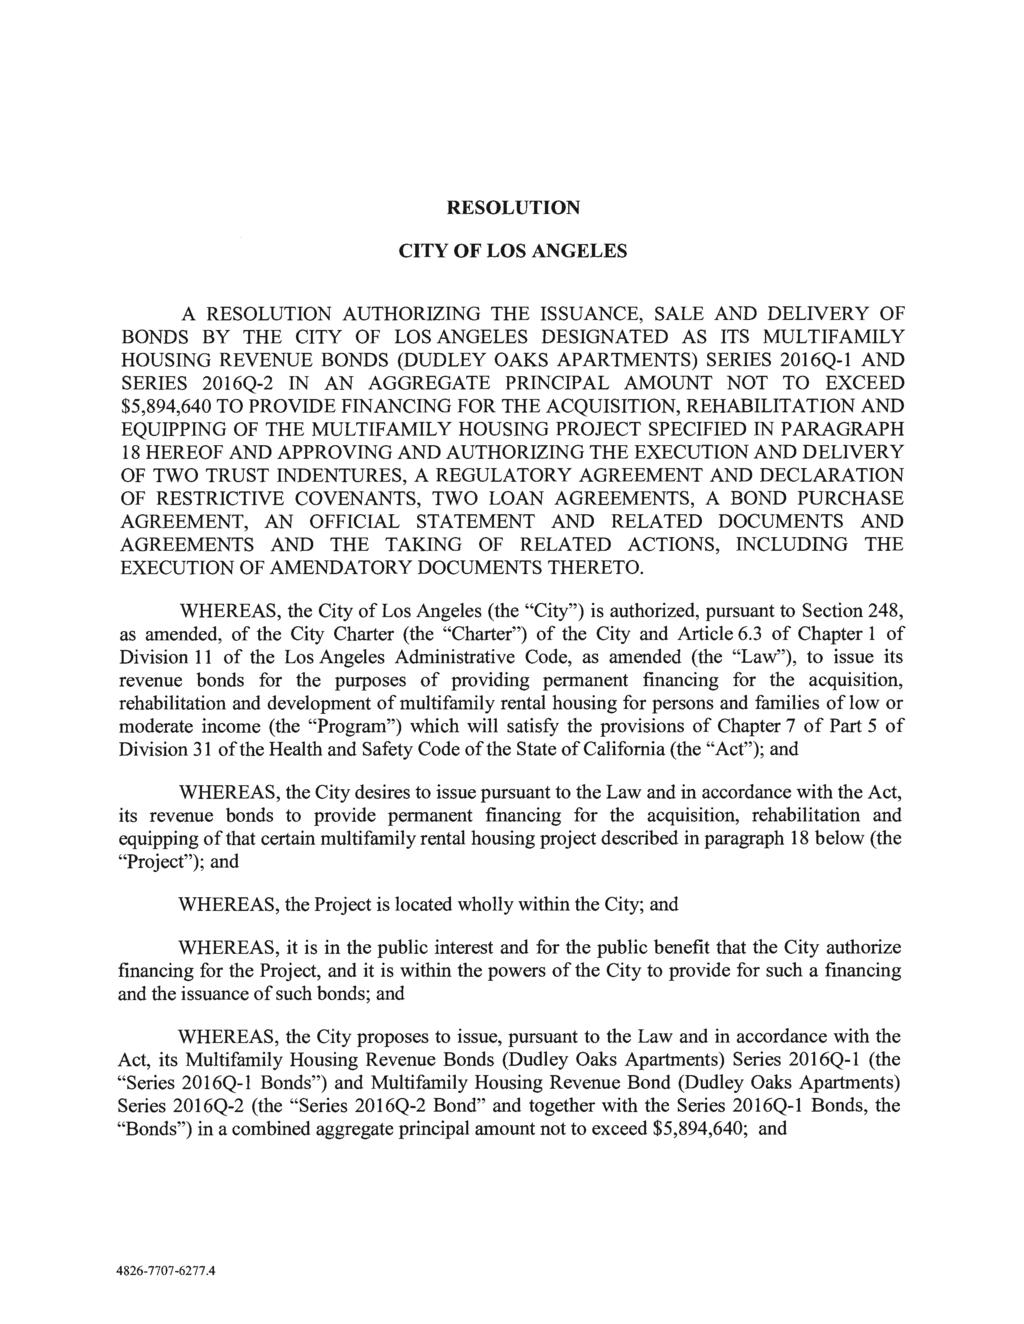 RESOLUTION CITY OF LOS ANGELES A RESOLUTION AUTHORIZING THE ISSUANCE, SALE AND DELIVERY OF BONDS BY THE CITY OF LOS ANGELES DESIGNATED AS ITS MULTIFAMILY HOUSING REVENUE BONDS (DUDLEY OAKS